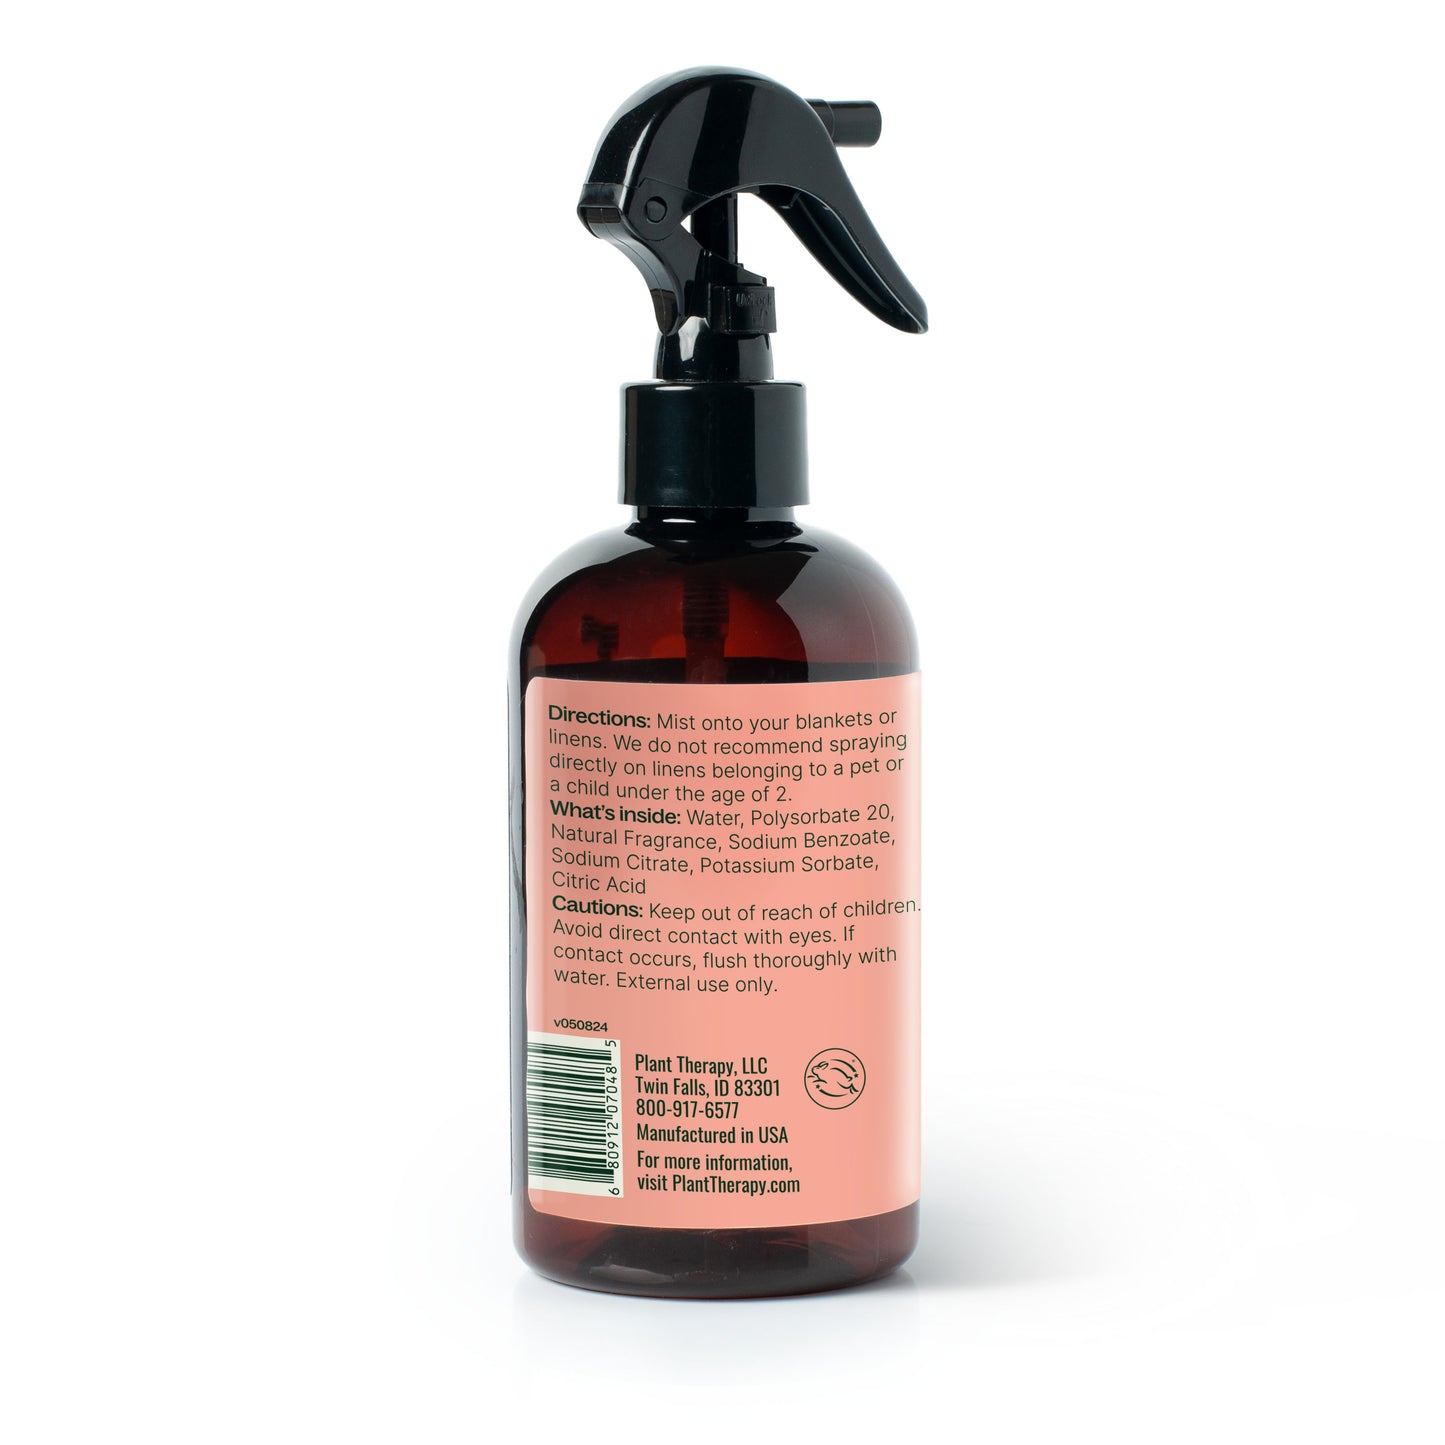 Pearberry Lychee Linen Spray